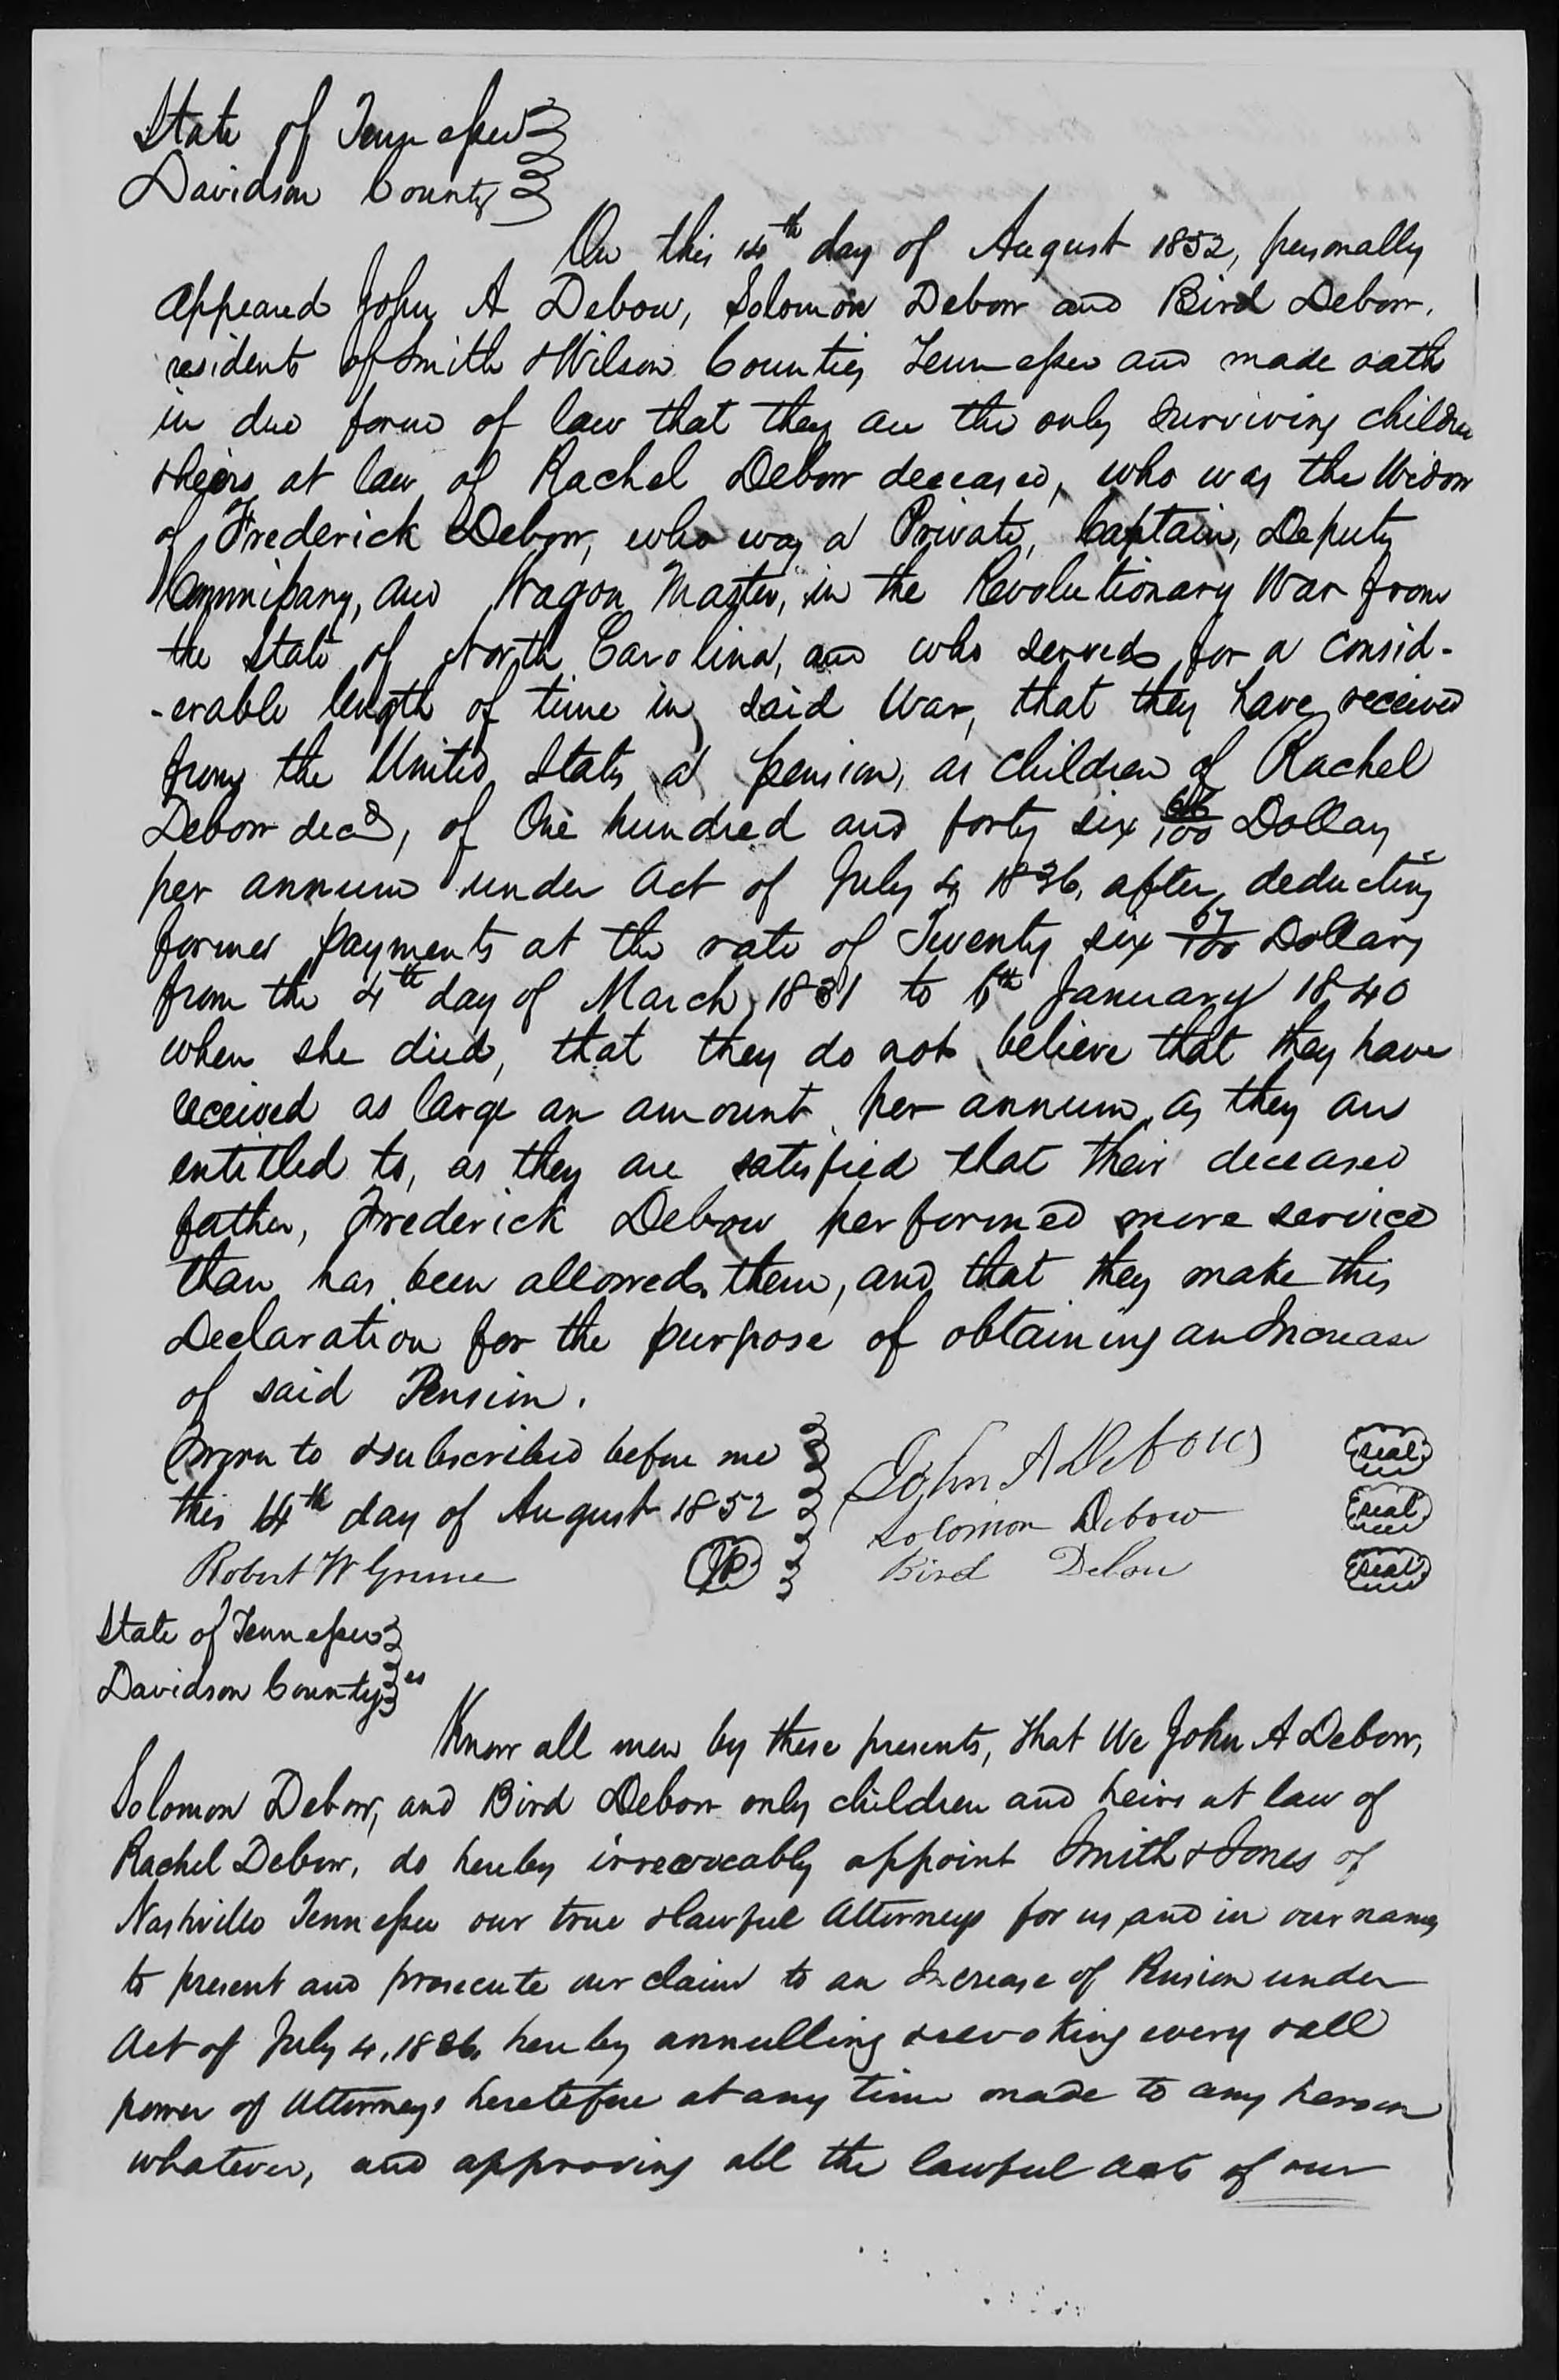 Declaration of Heirs of Rachel Debow to the U.S. Pension Office, 4 August 1852, page 1